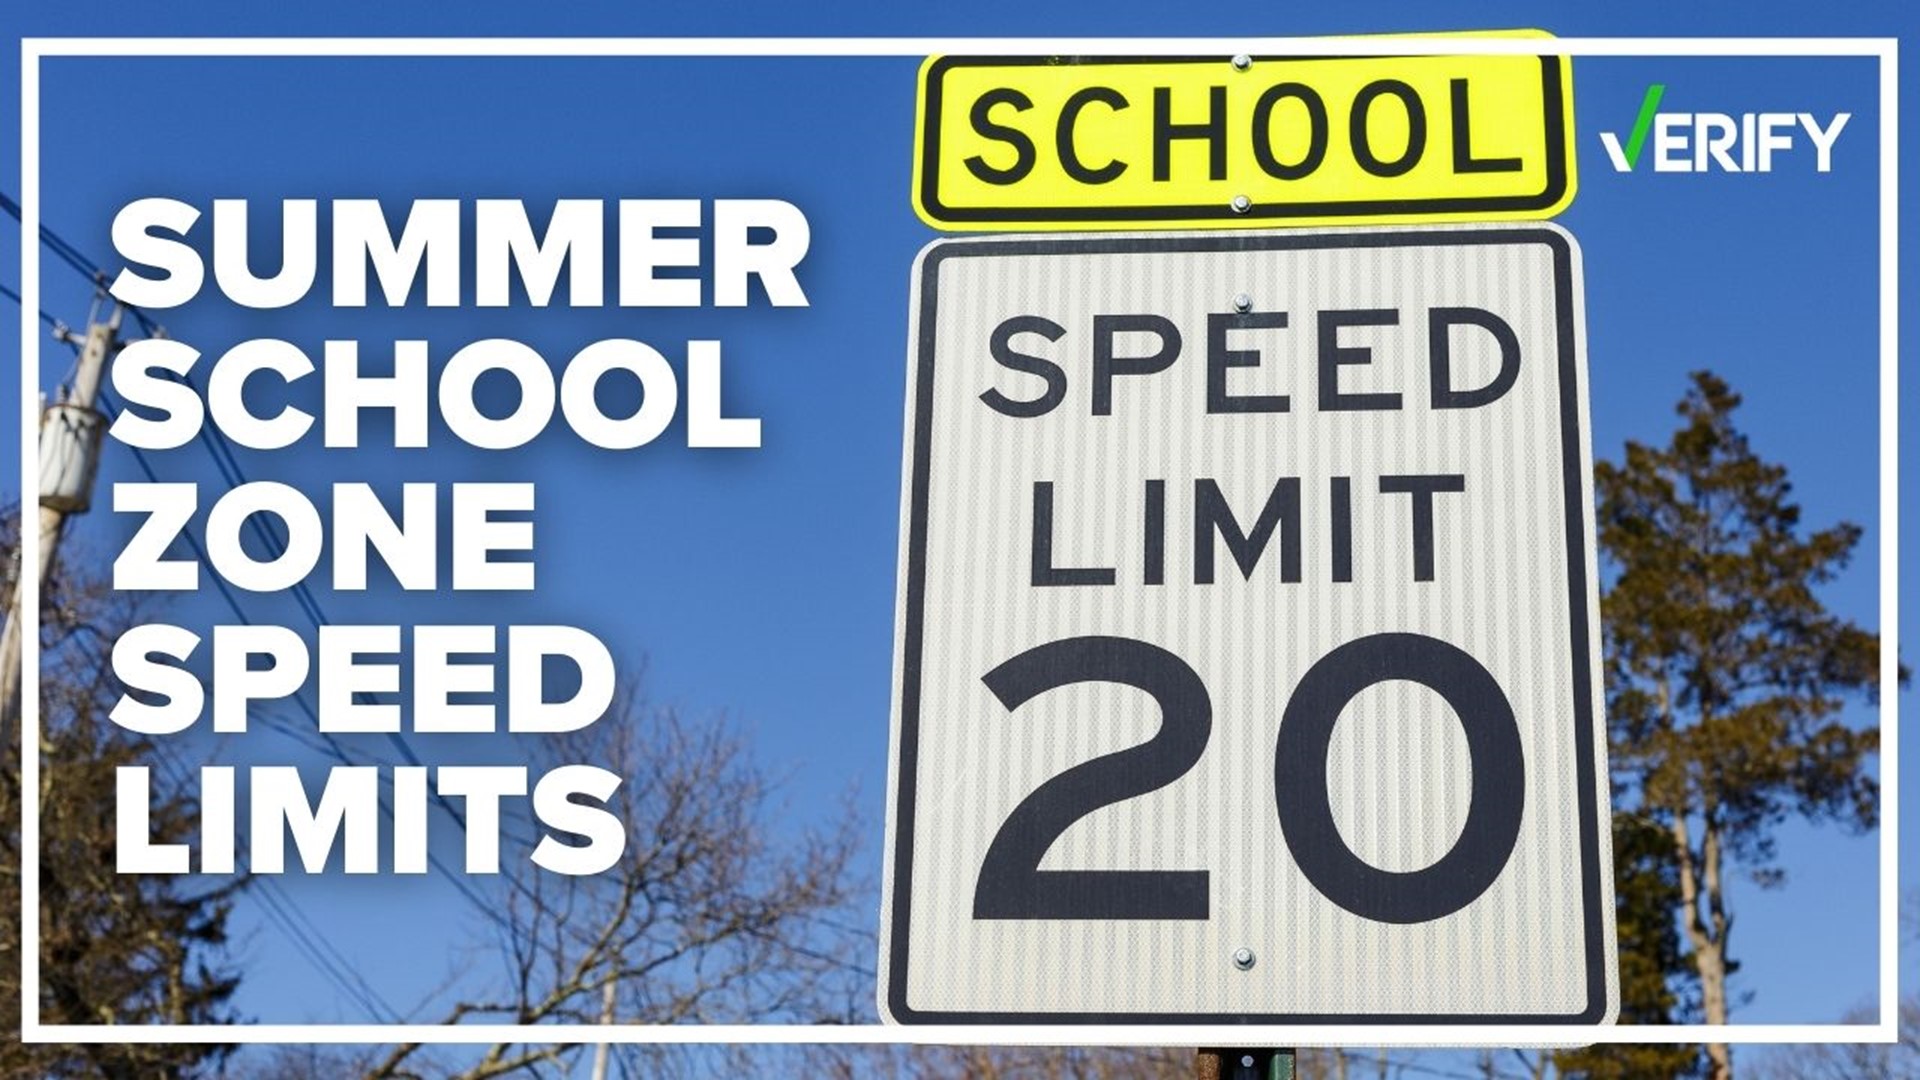 School's out for summer break, but school zone lights are still flashing during pickup and drop-off times. Many people are wondering if you have to slow down.